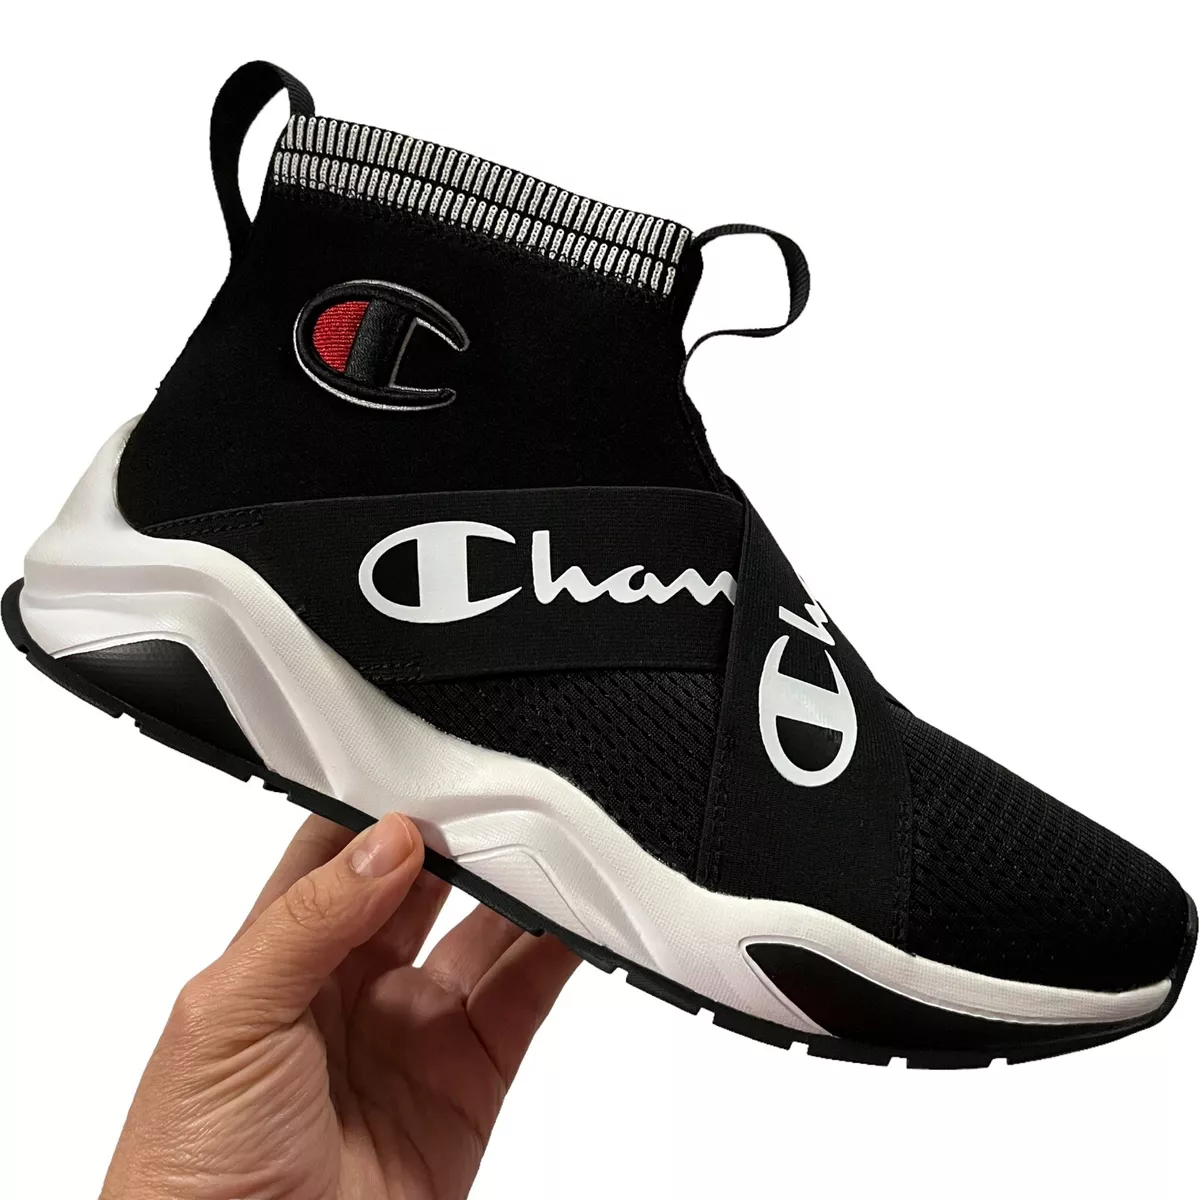 🇨🇦 Champion Shoes Men 8-13... - Home Based Canada's Brand | Facebook-calidas.vn